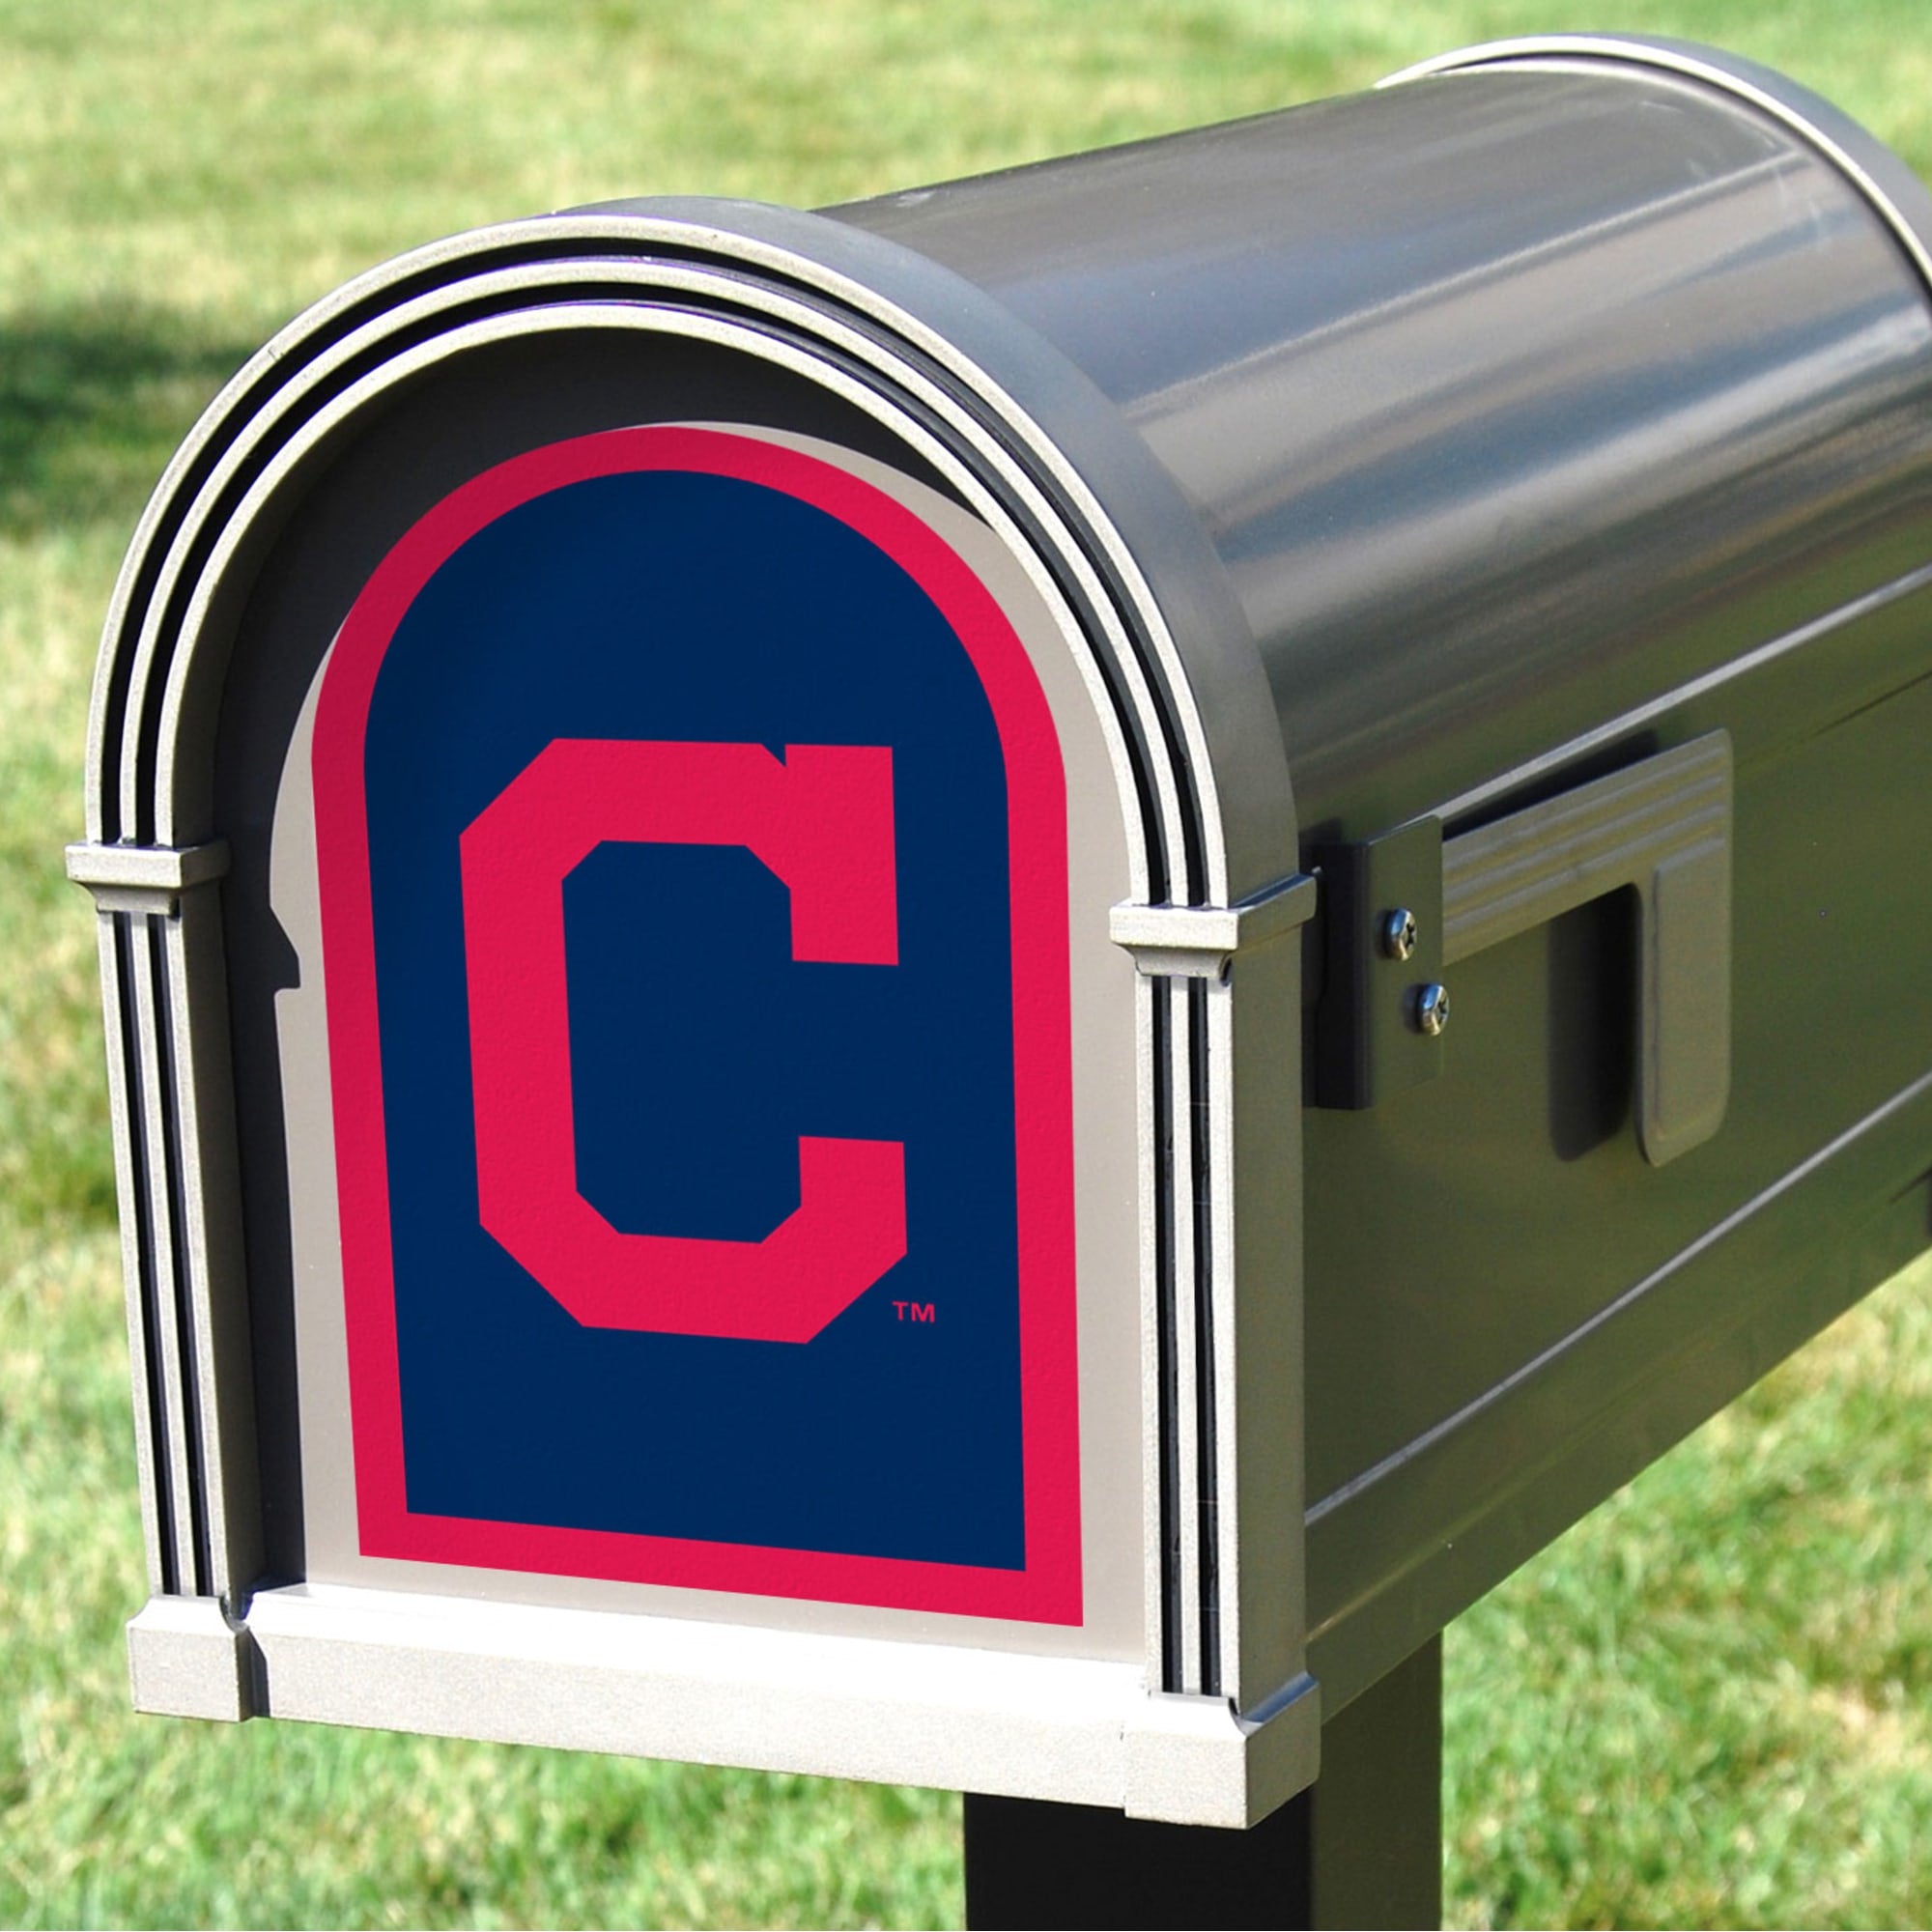 Cleveland Indians: Mailbox Logo - Officially Licensed MLB Outdoor Graphic 5.0"W x 8.0"H by Fathead | Wood/Aluminum